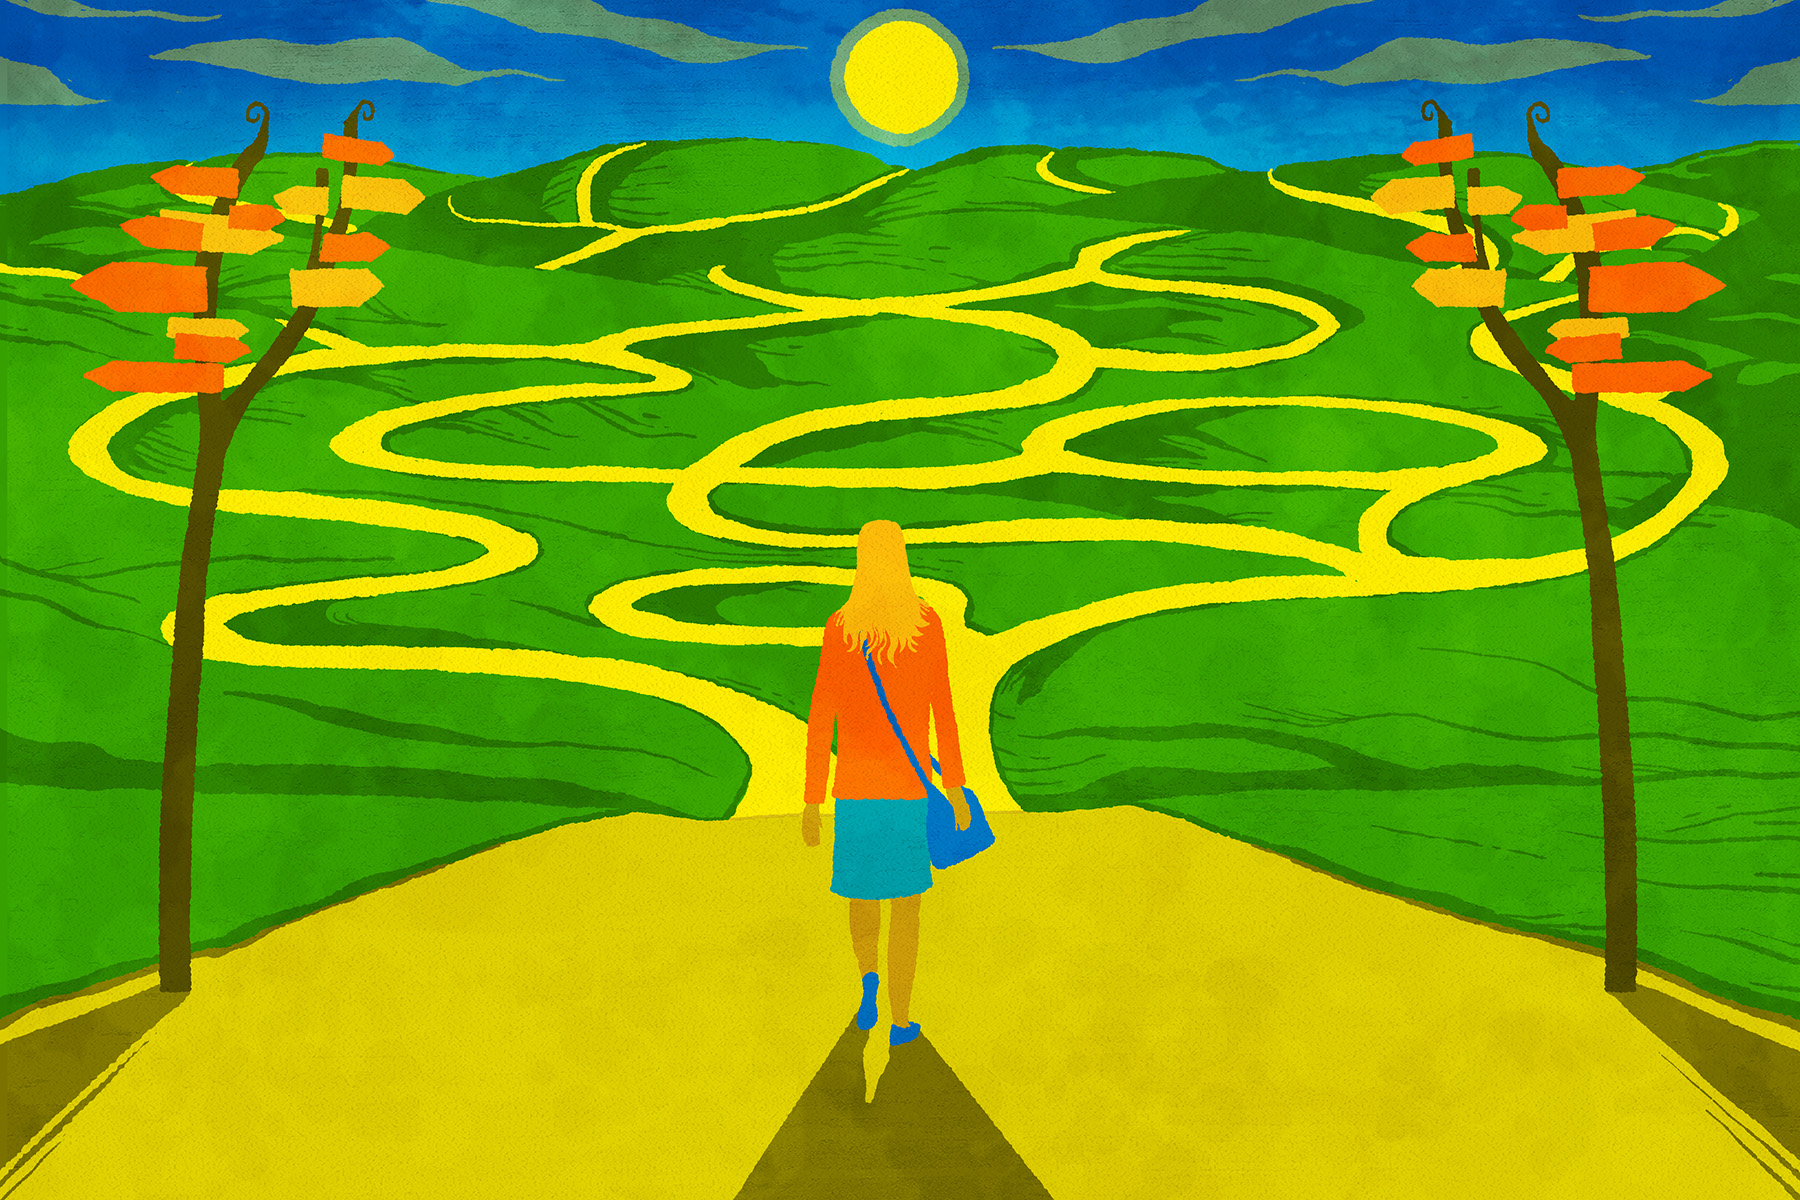 An illustration of a woman standing in front of a golden path that forks and winds everywhere across a green horizon.